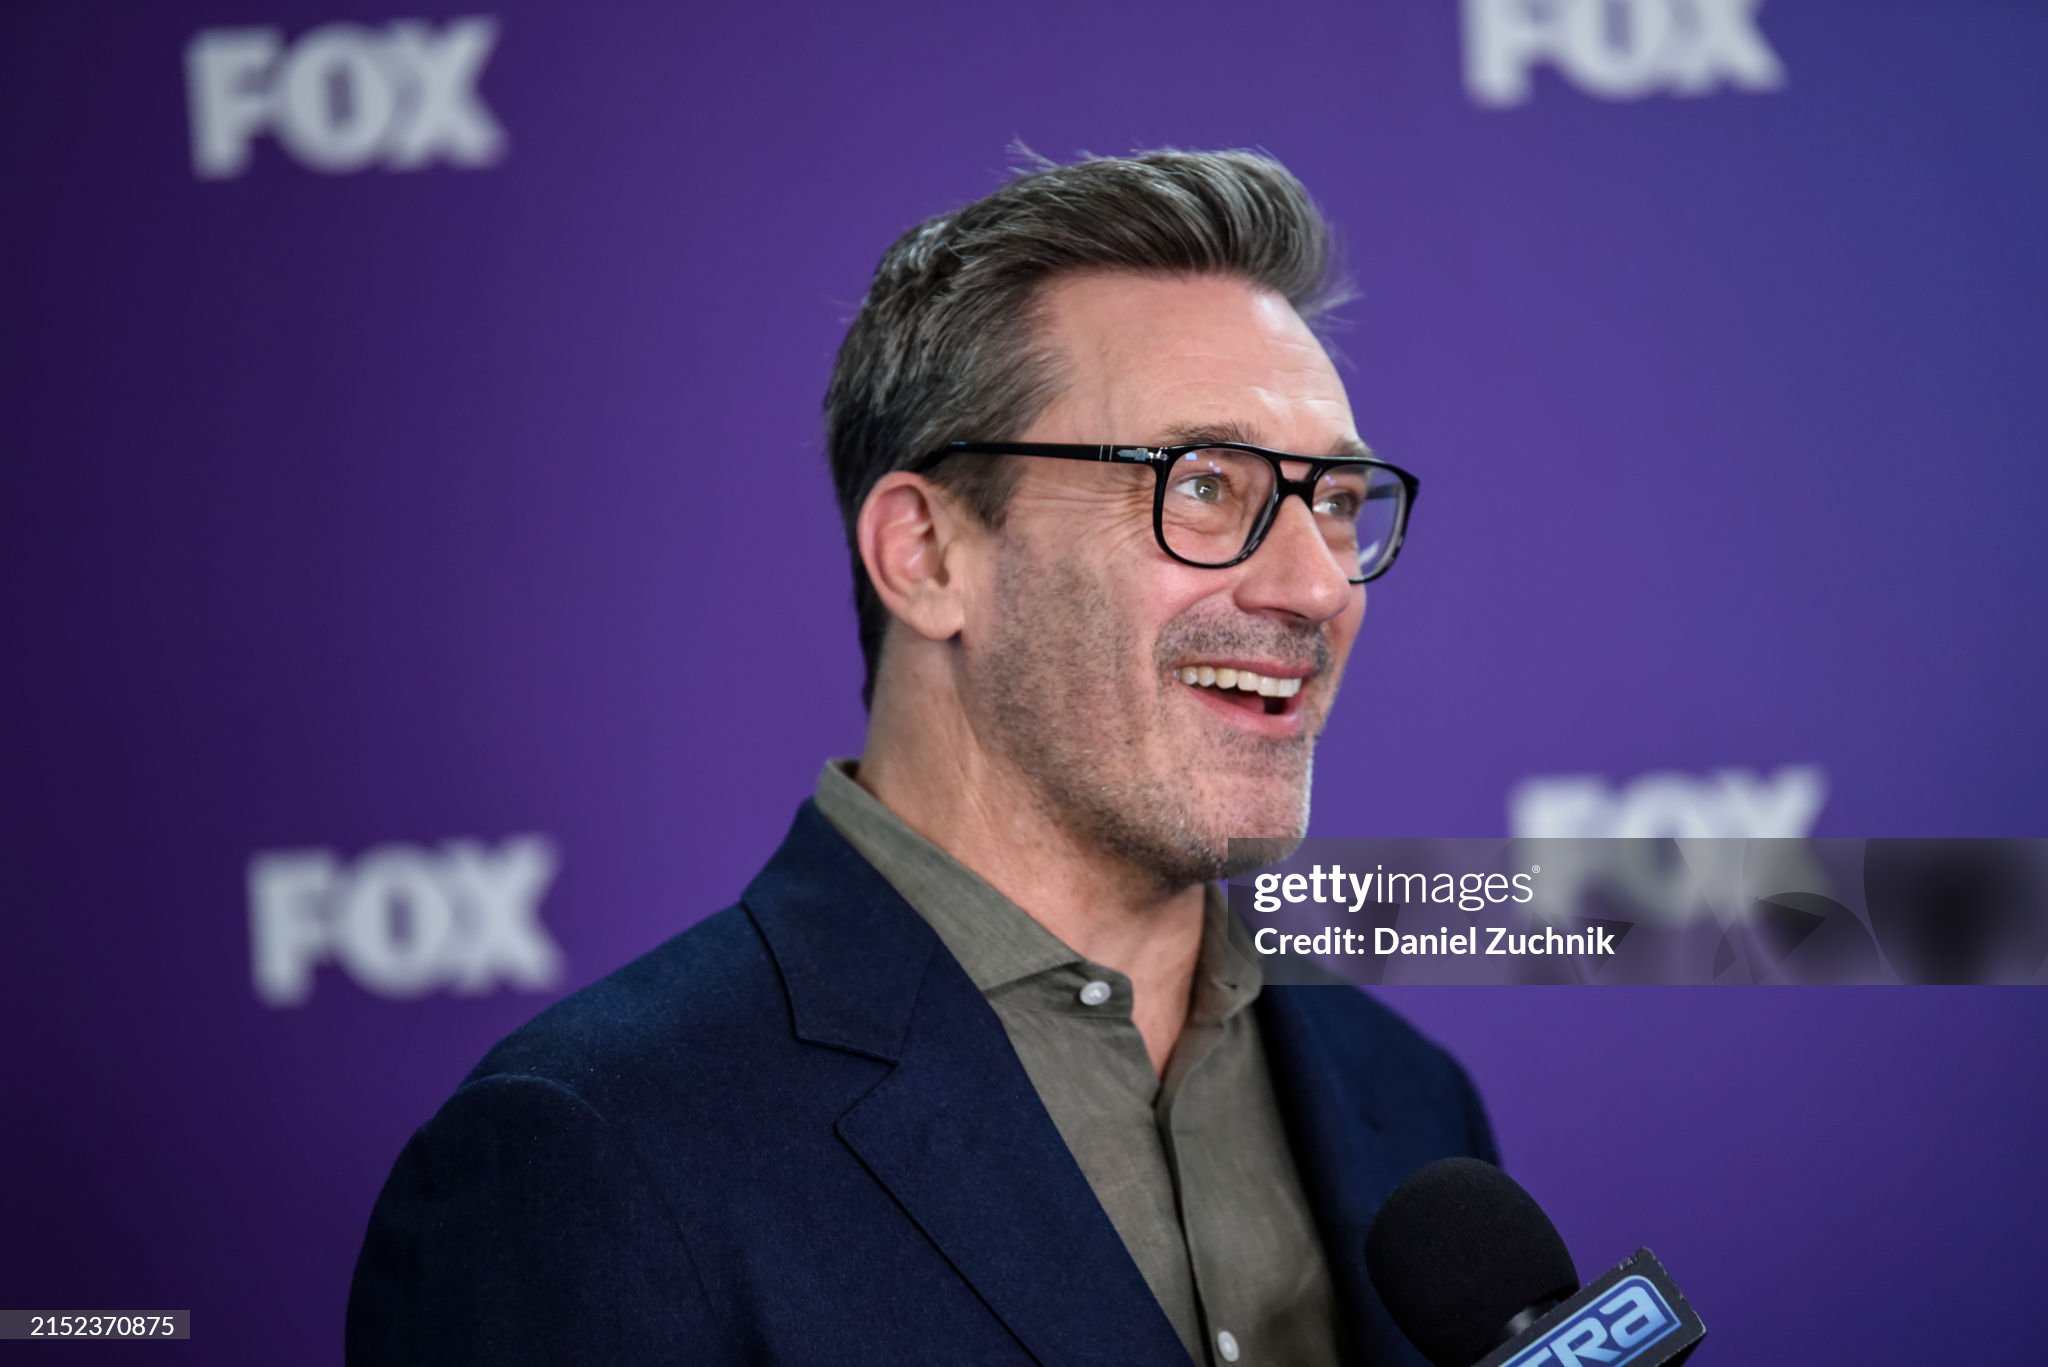 gettyimages-2152370875-2048x2048.jpg